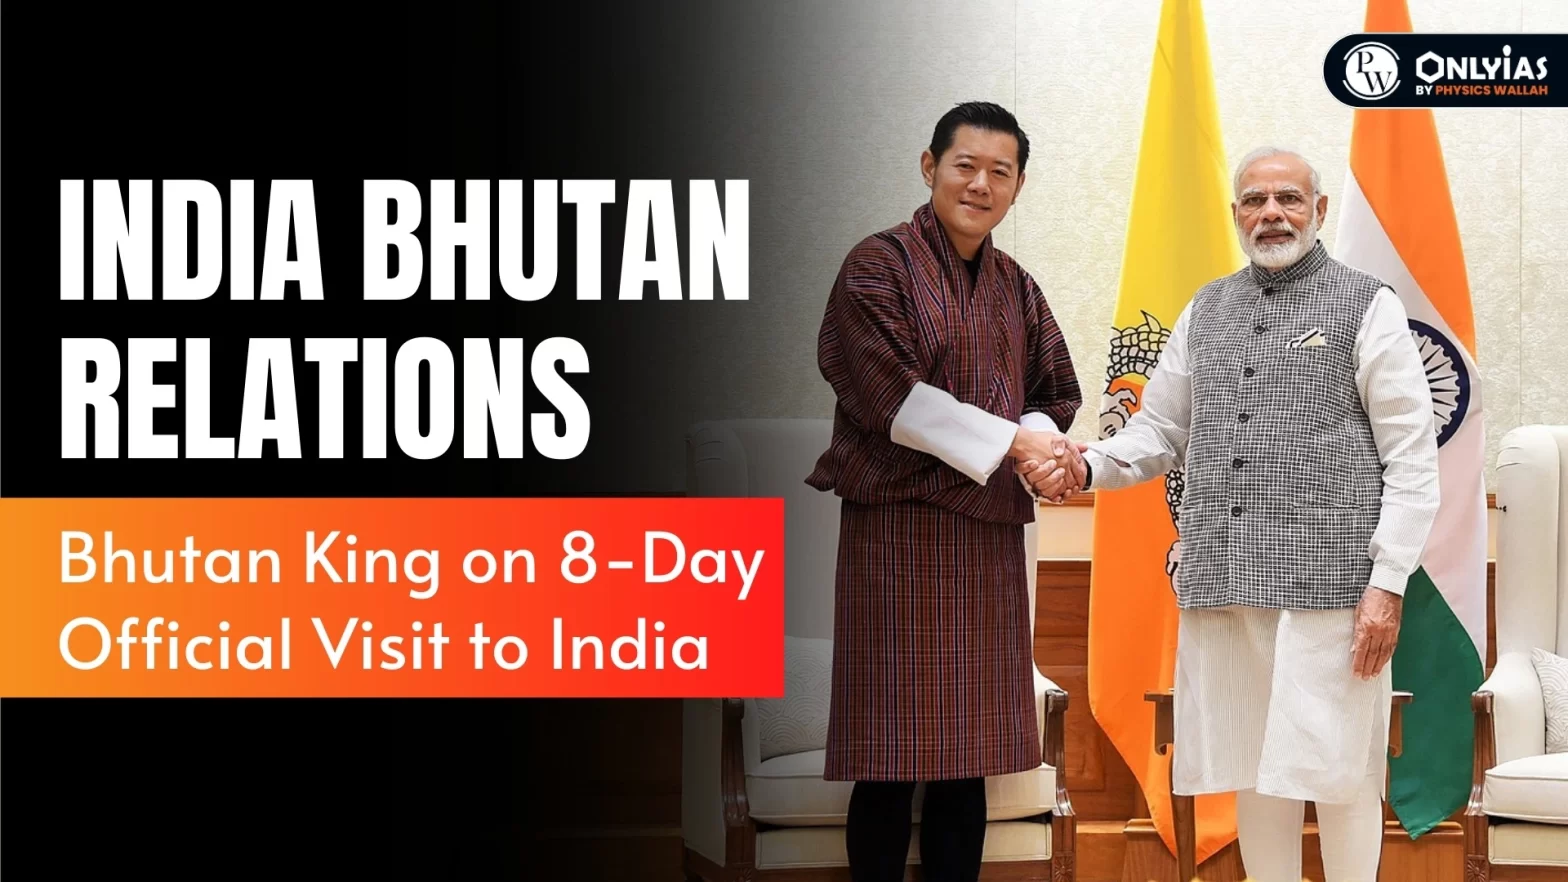 India Bhutan Relations – Bhutan King on 8-Day Official Visit to India